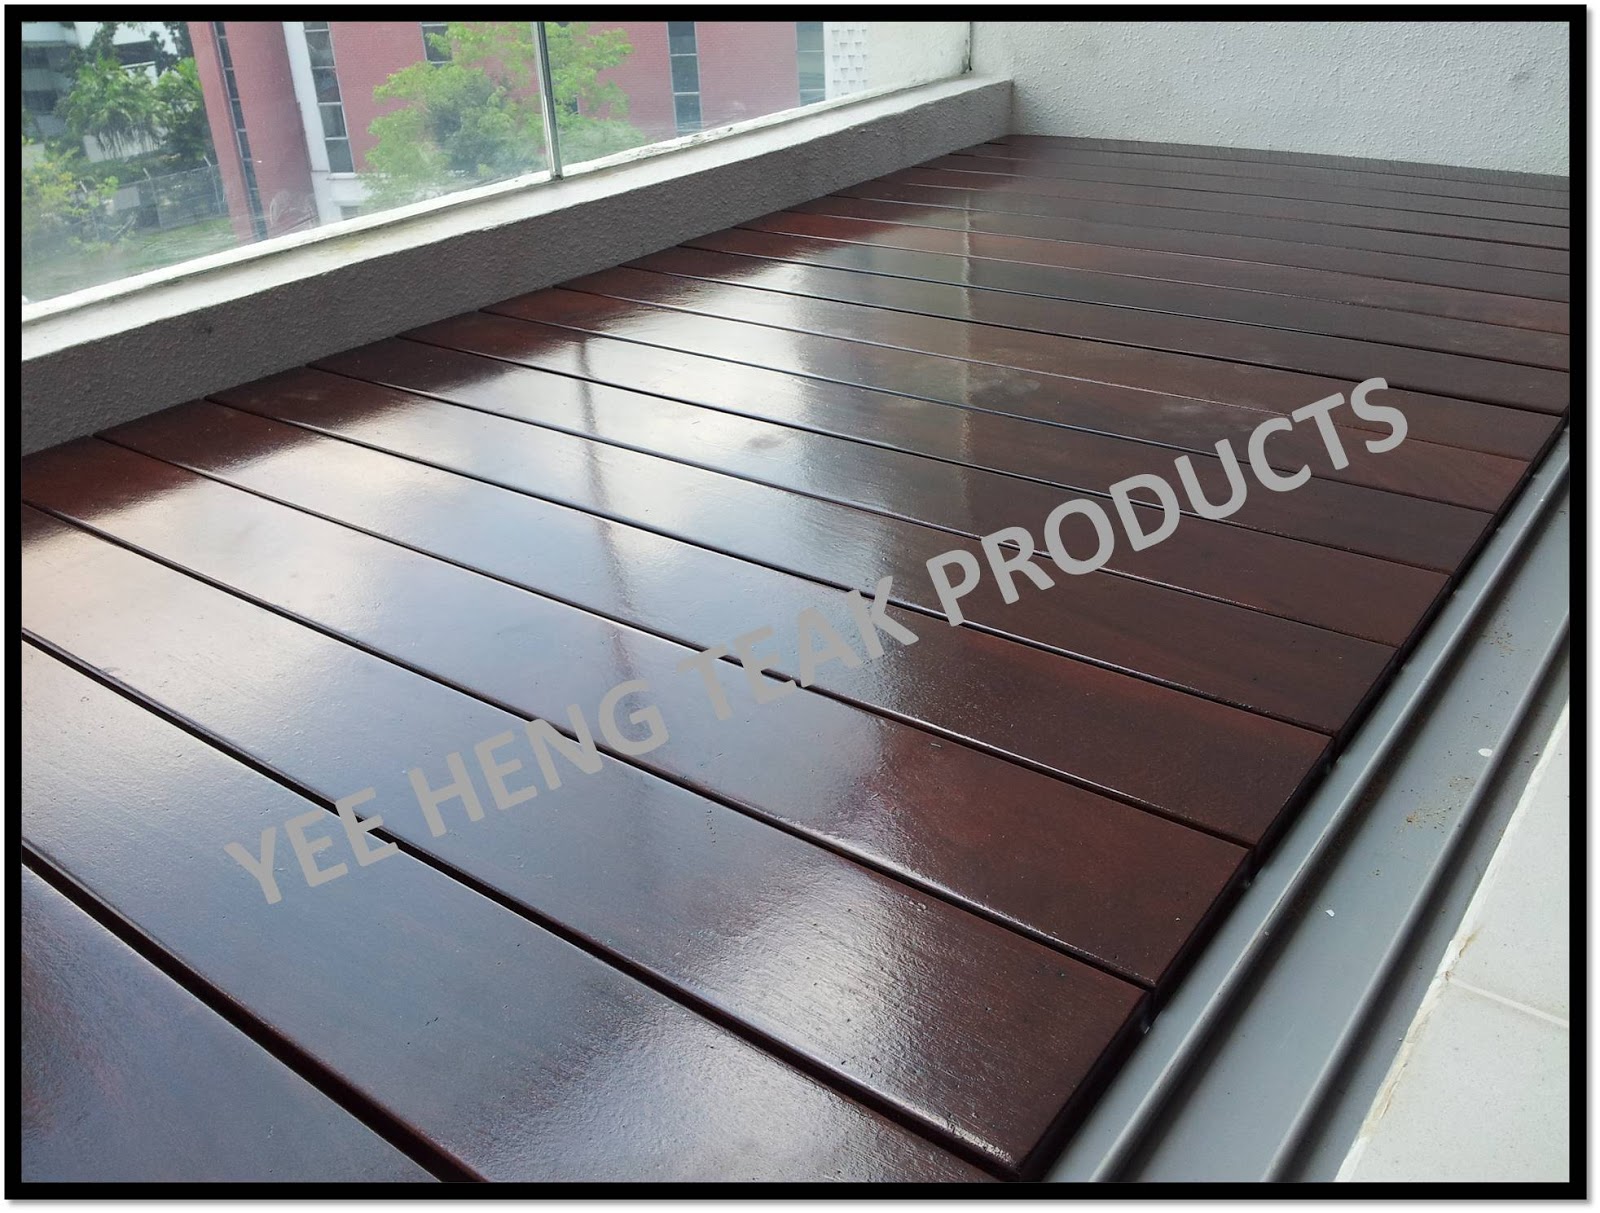 Yee Heng Teak Products: Previous Projects